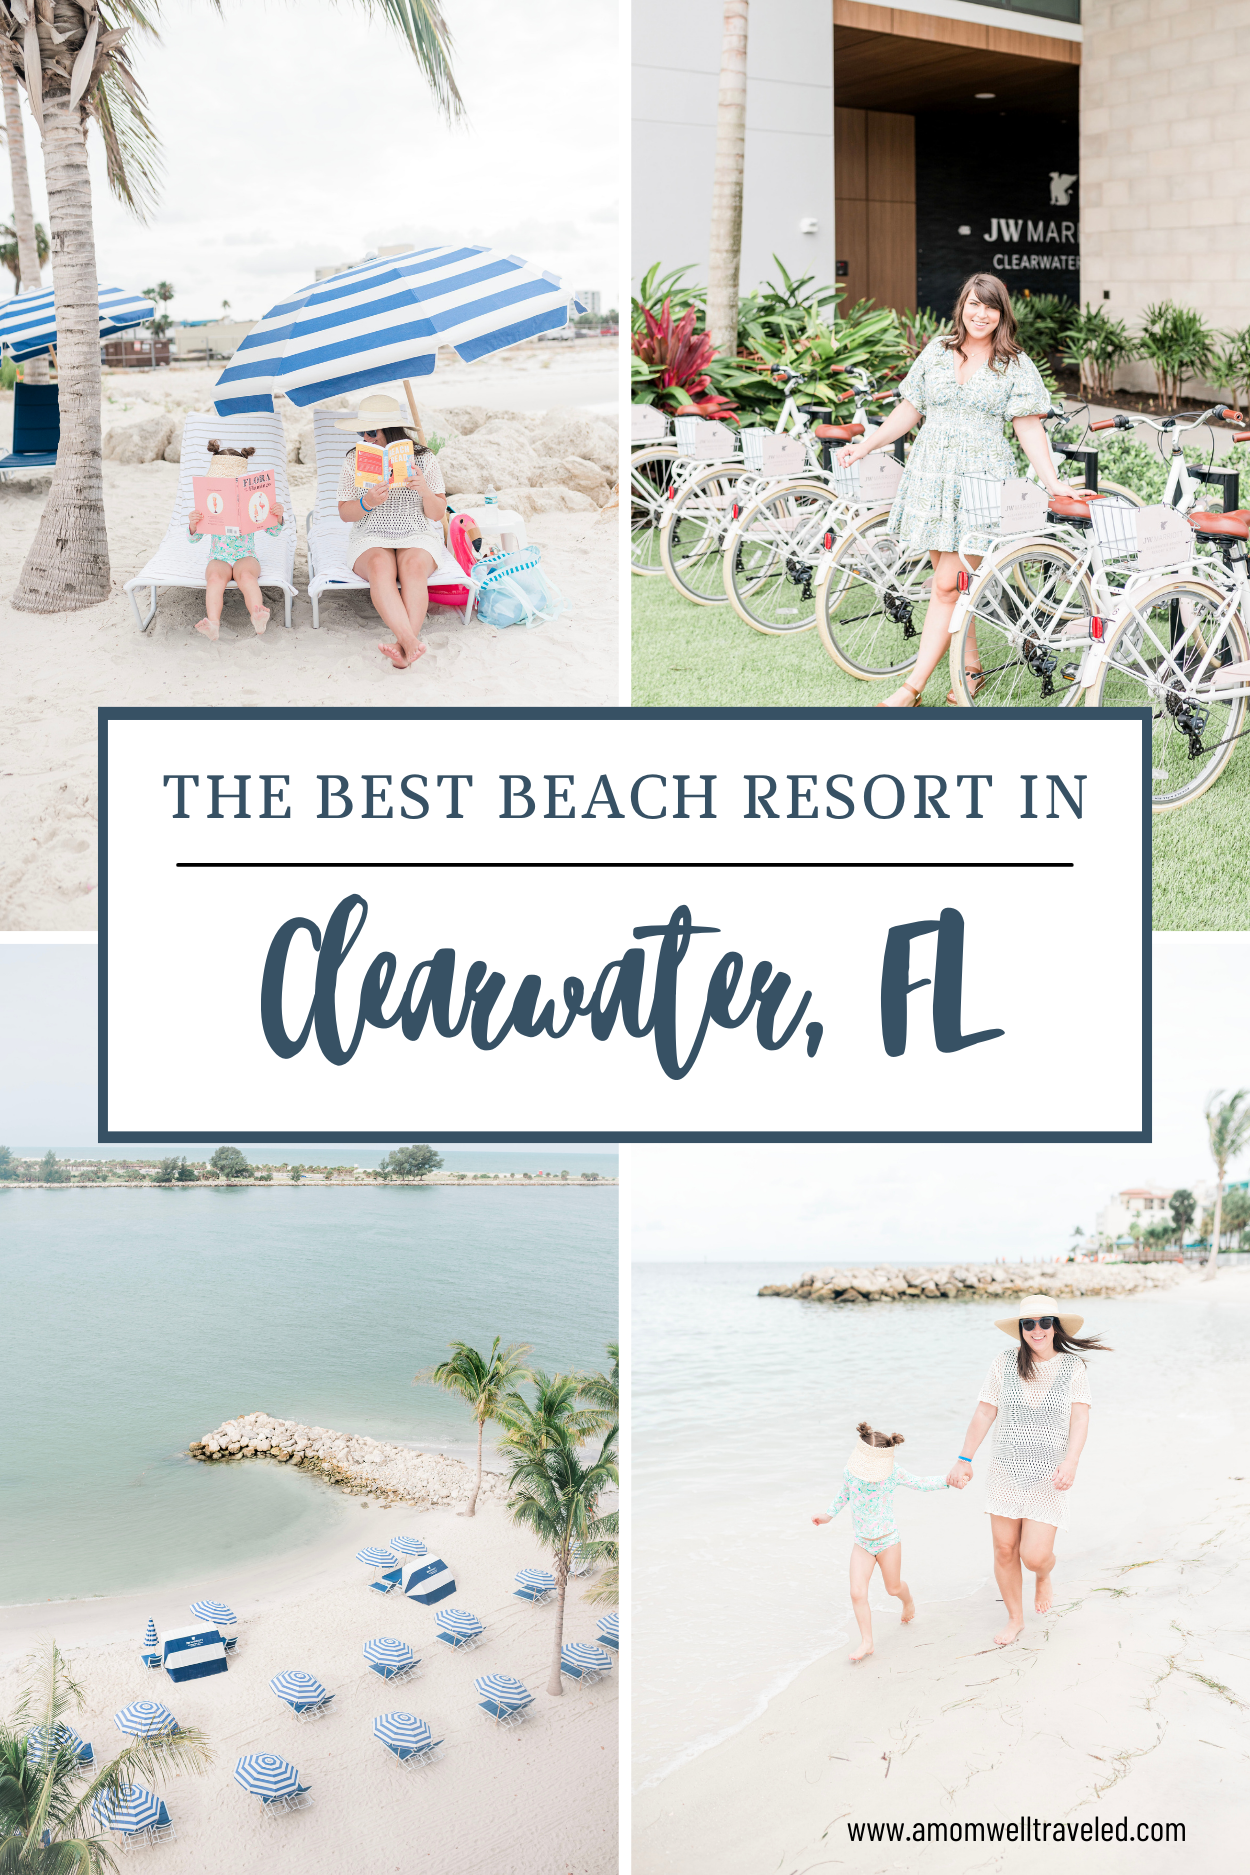 Hotel review of the best beach resort in clearwater beach, florida